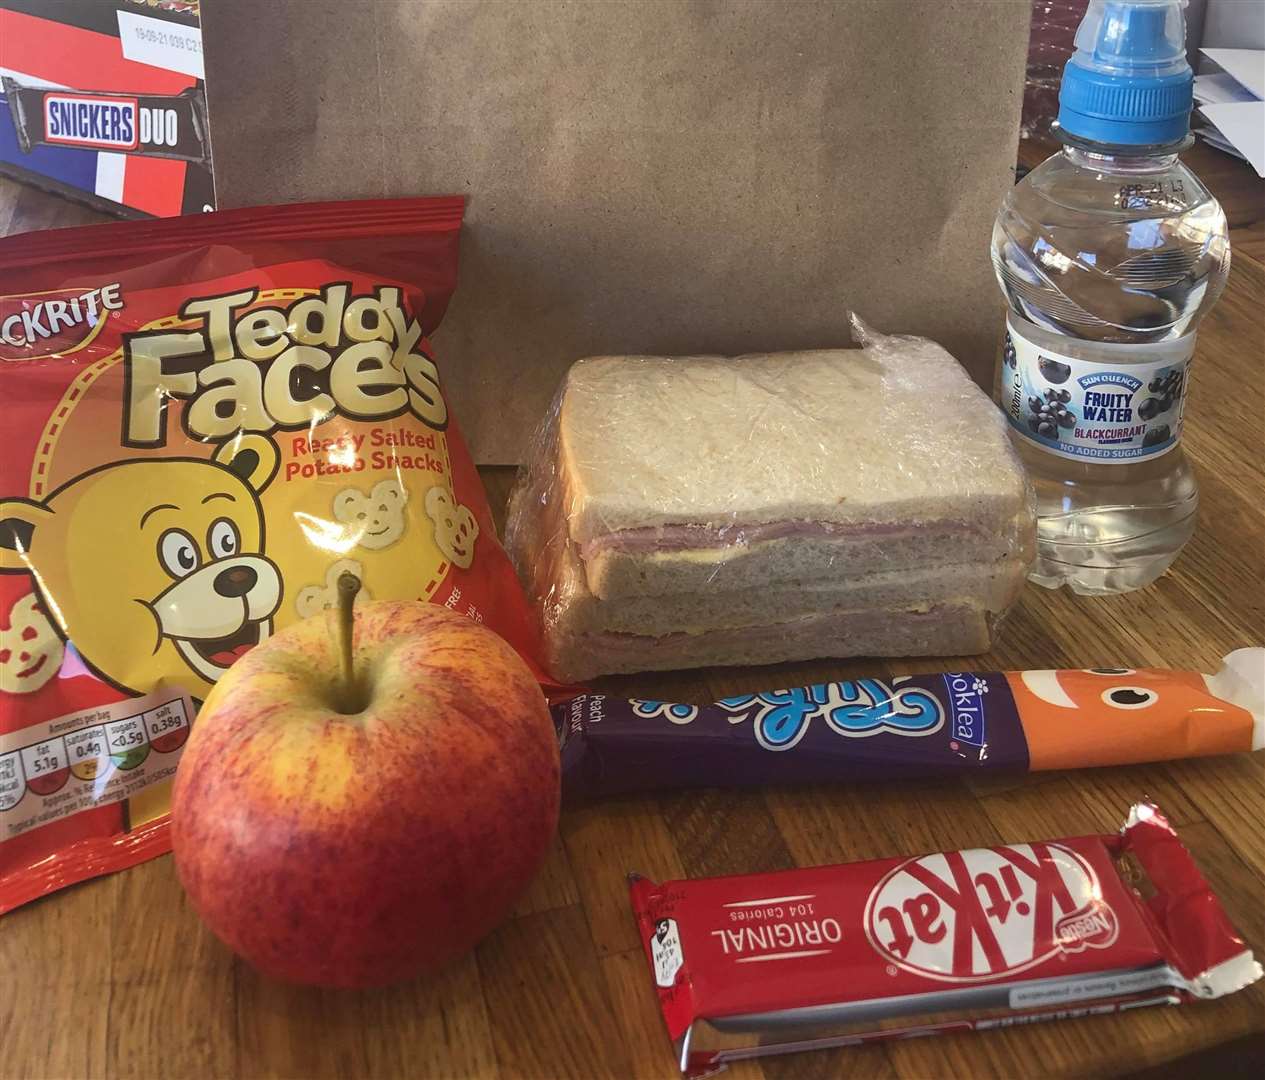 Should councillors bring their own packed lunch to meetings?